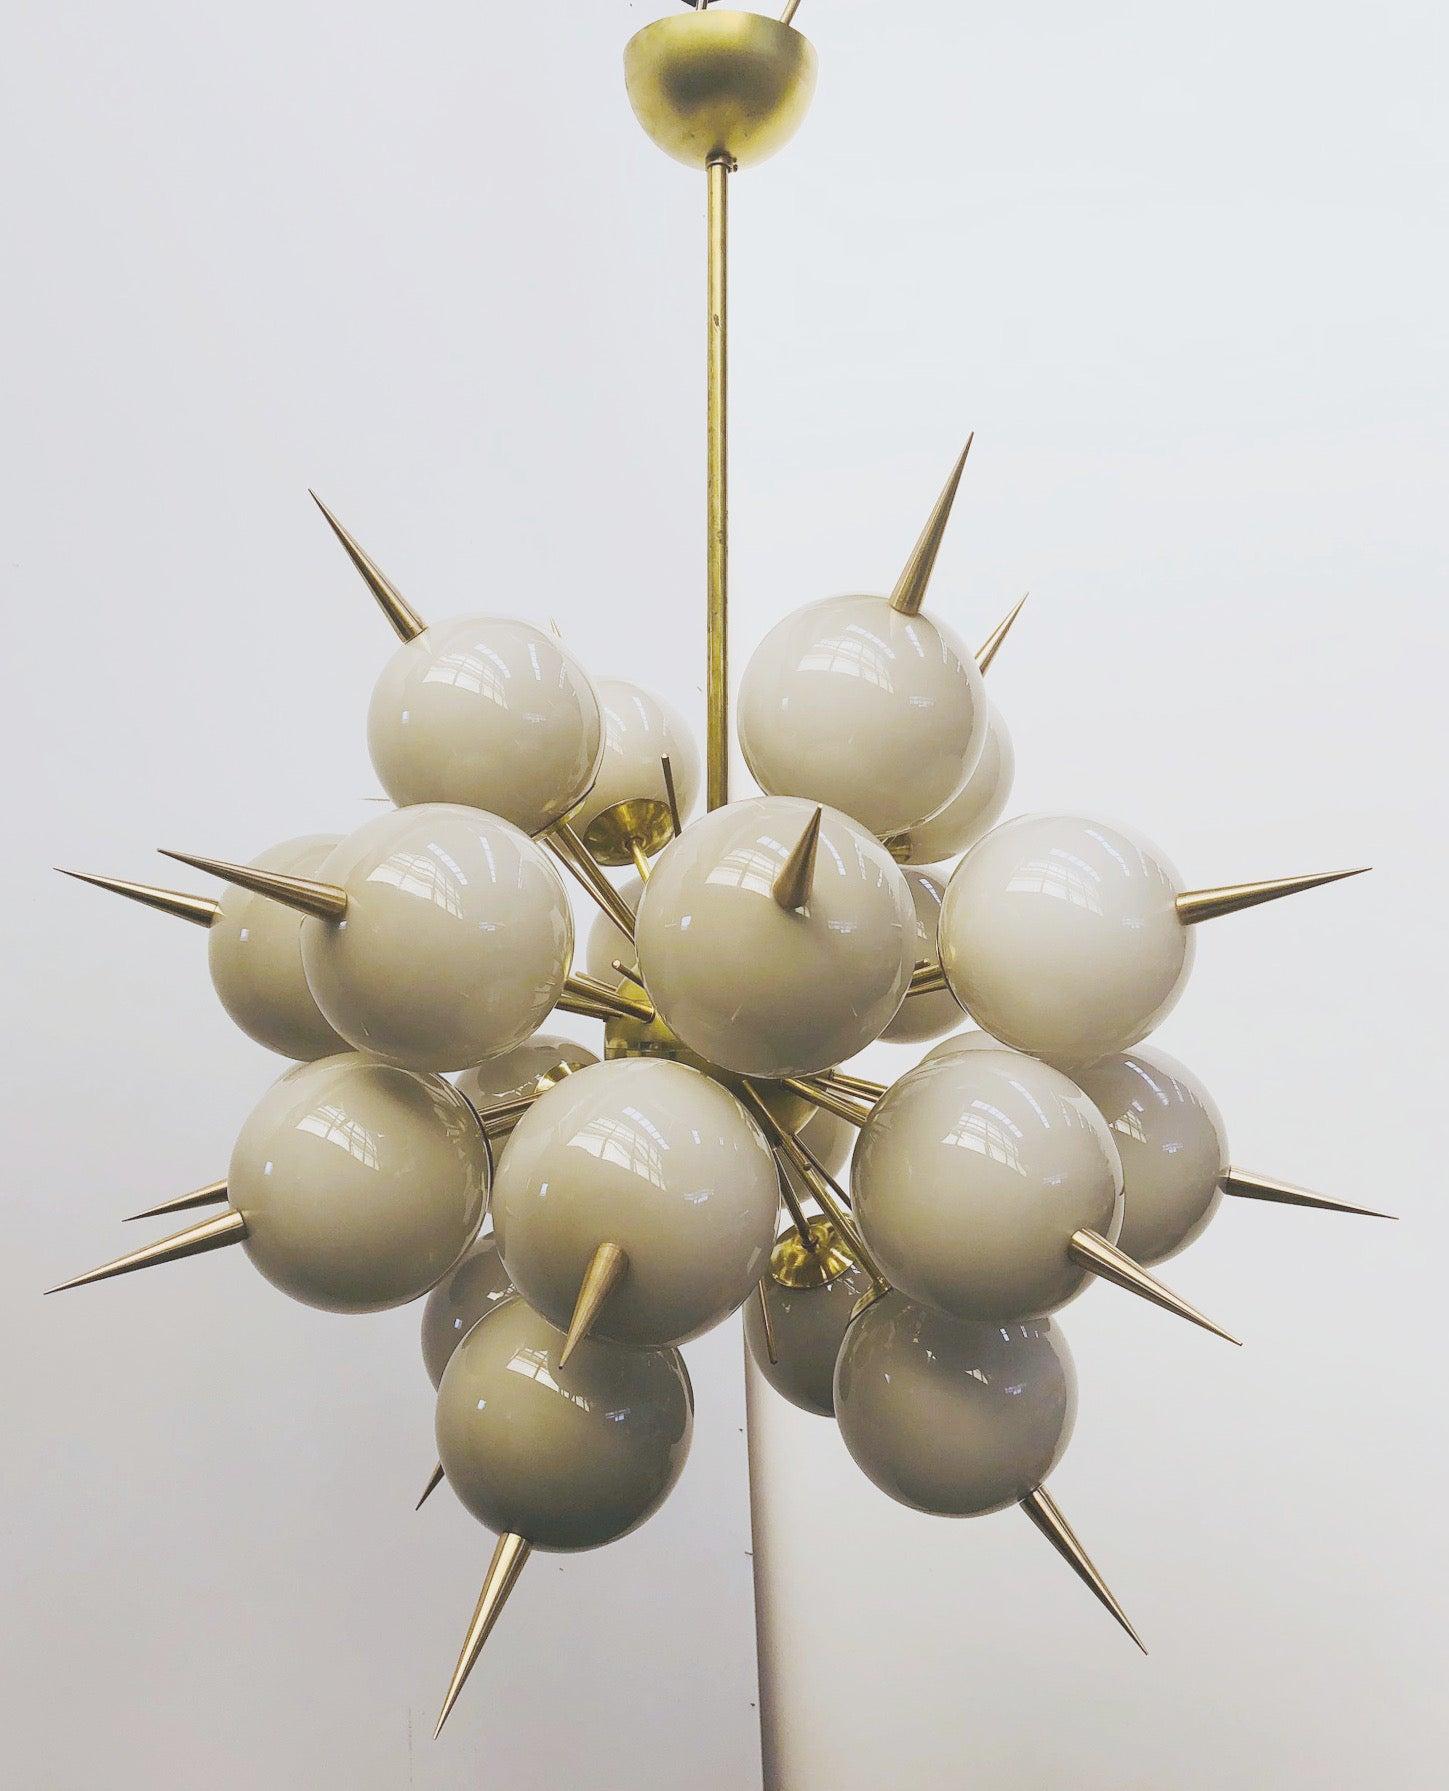 Italian Sputnik chandelier with 24 Murano glass globes and solid brass spikes mounted on brass frame / Designed by Fabio Bergomi for Fabio Ltd / Made in Italy
24-light / E12 or E14 type / max 40W each
Measures: Diameter 38 inches, height 46 inches